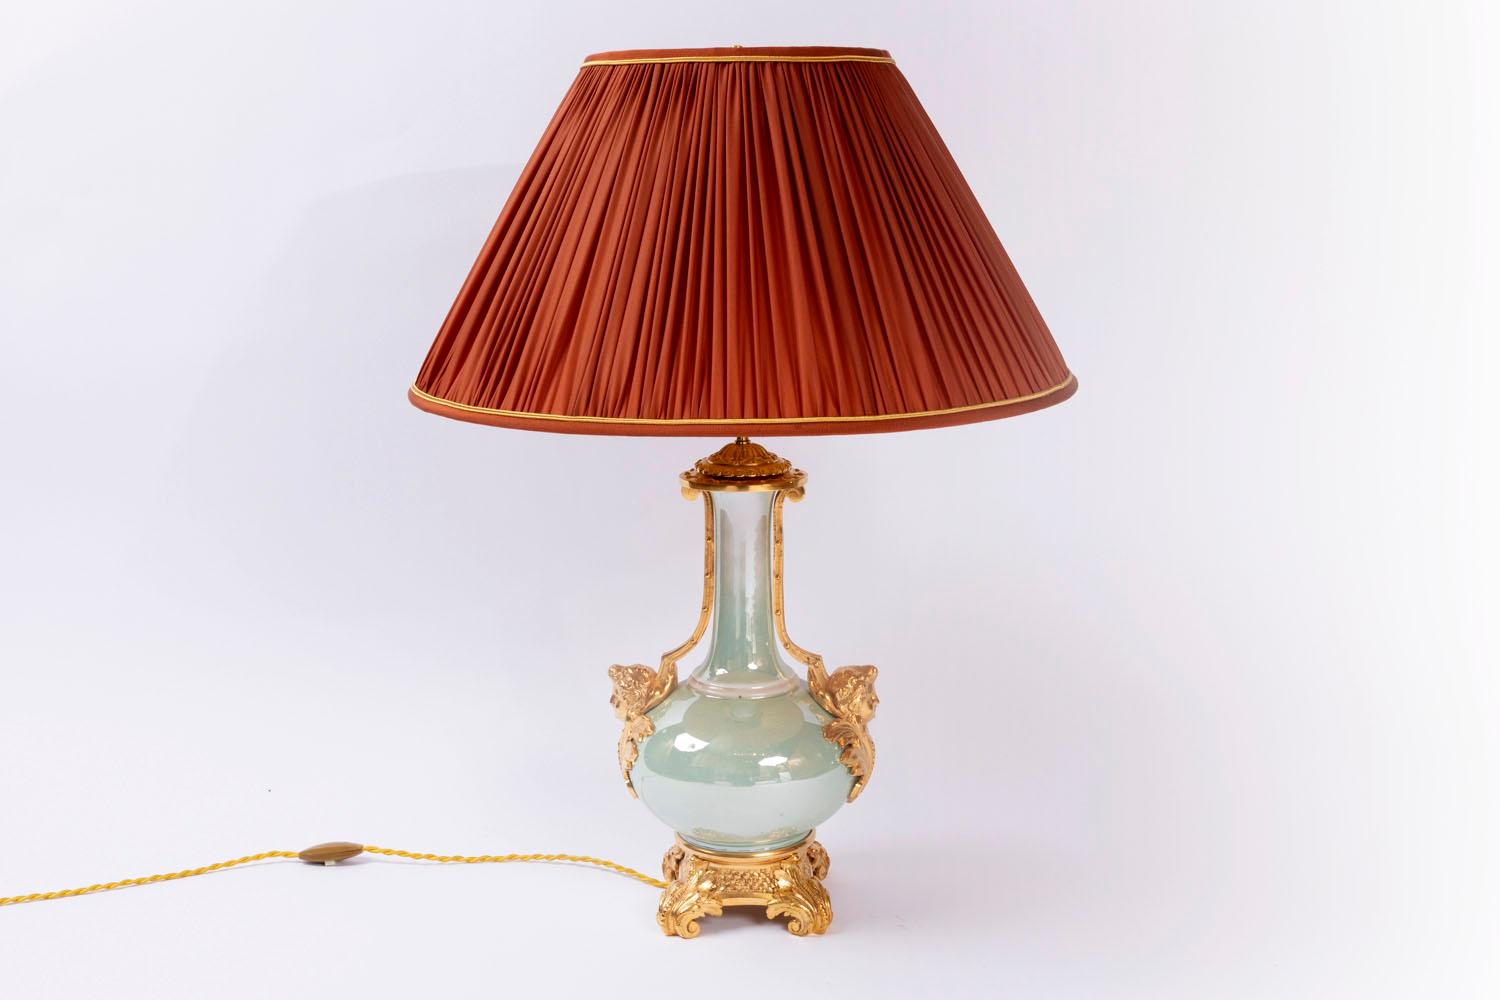 Baluster lamp in green iridescent porcelain standing on a gilt and chiselled bronze mount with a base decorated by small flowers on four wounded acanthus leave shaped foot.
The mount is fixed on the bulged body of the baluster thanks to two women